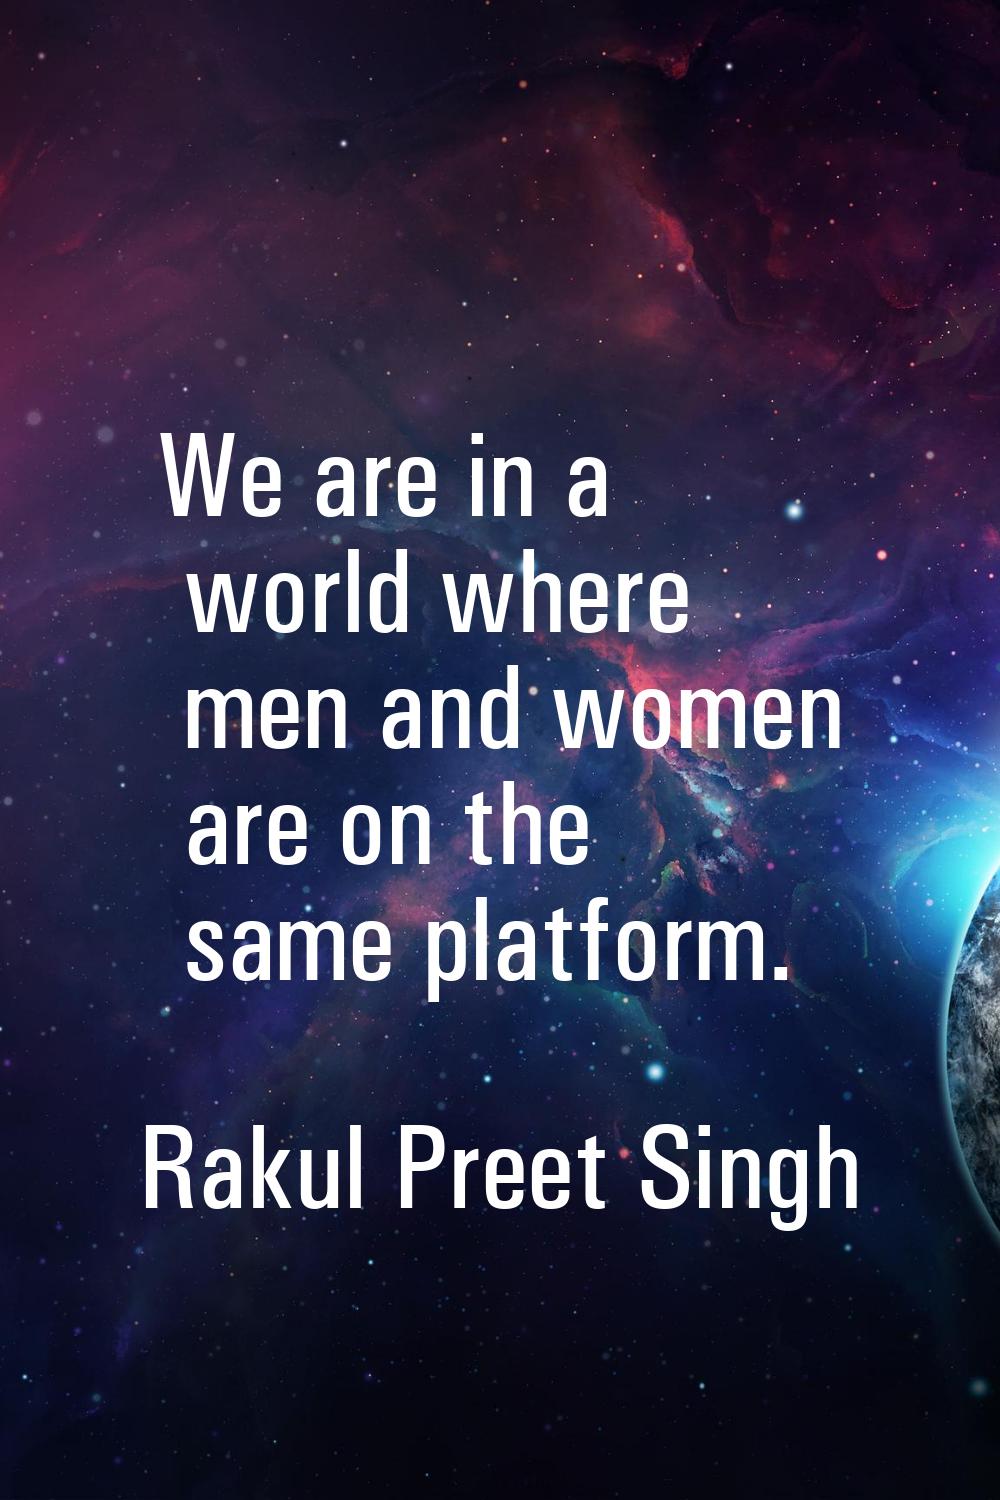 We are in a world where men and women are on the same platform.